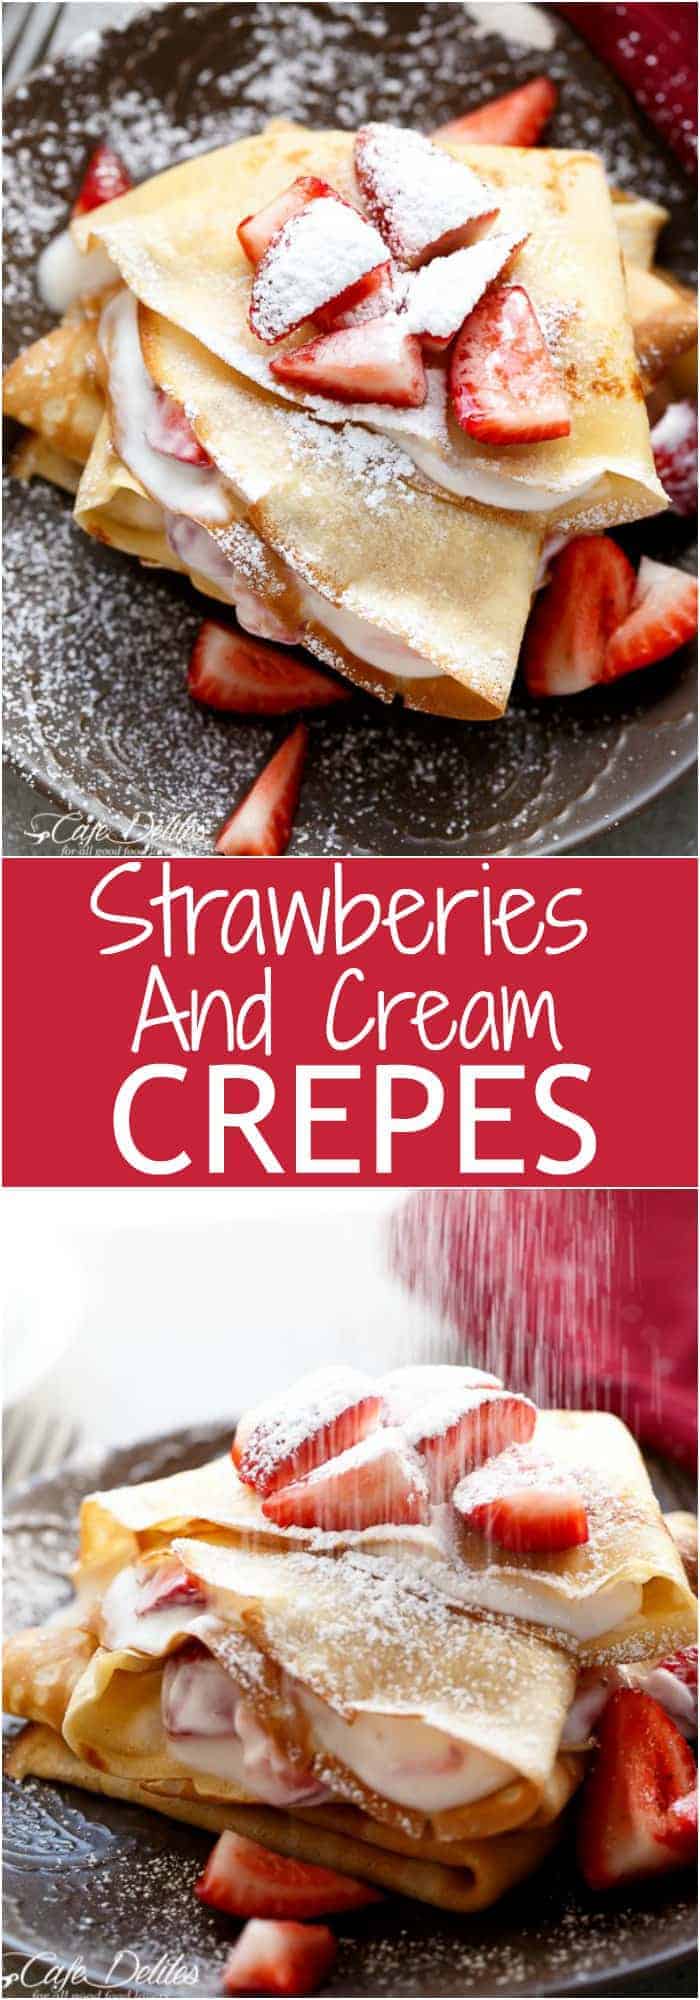 Strawberries and Cream Crepes Collage | https://cafedelites.com